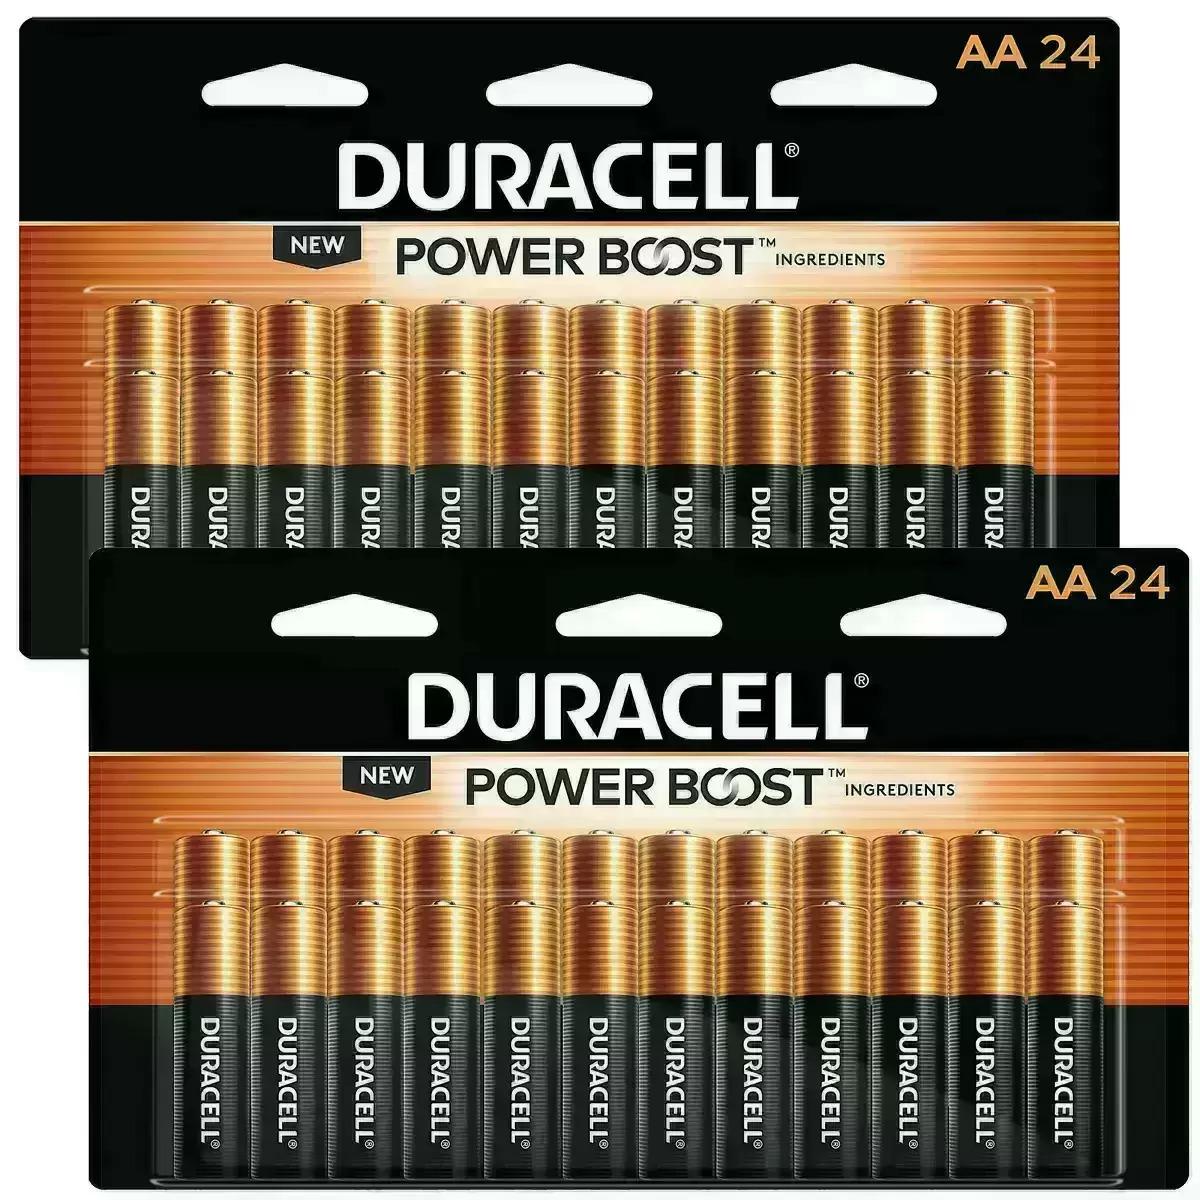 48 Duracell AA or AAA Alkaline Batteries for Free or Make Money